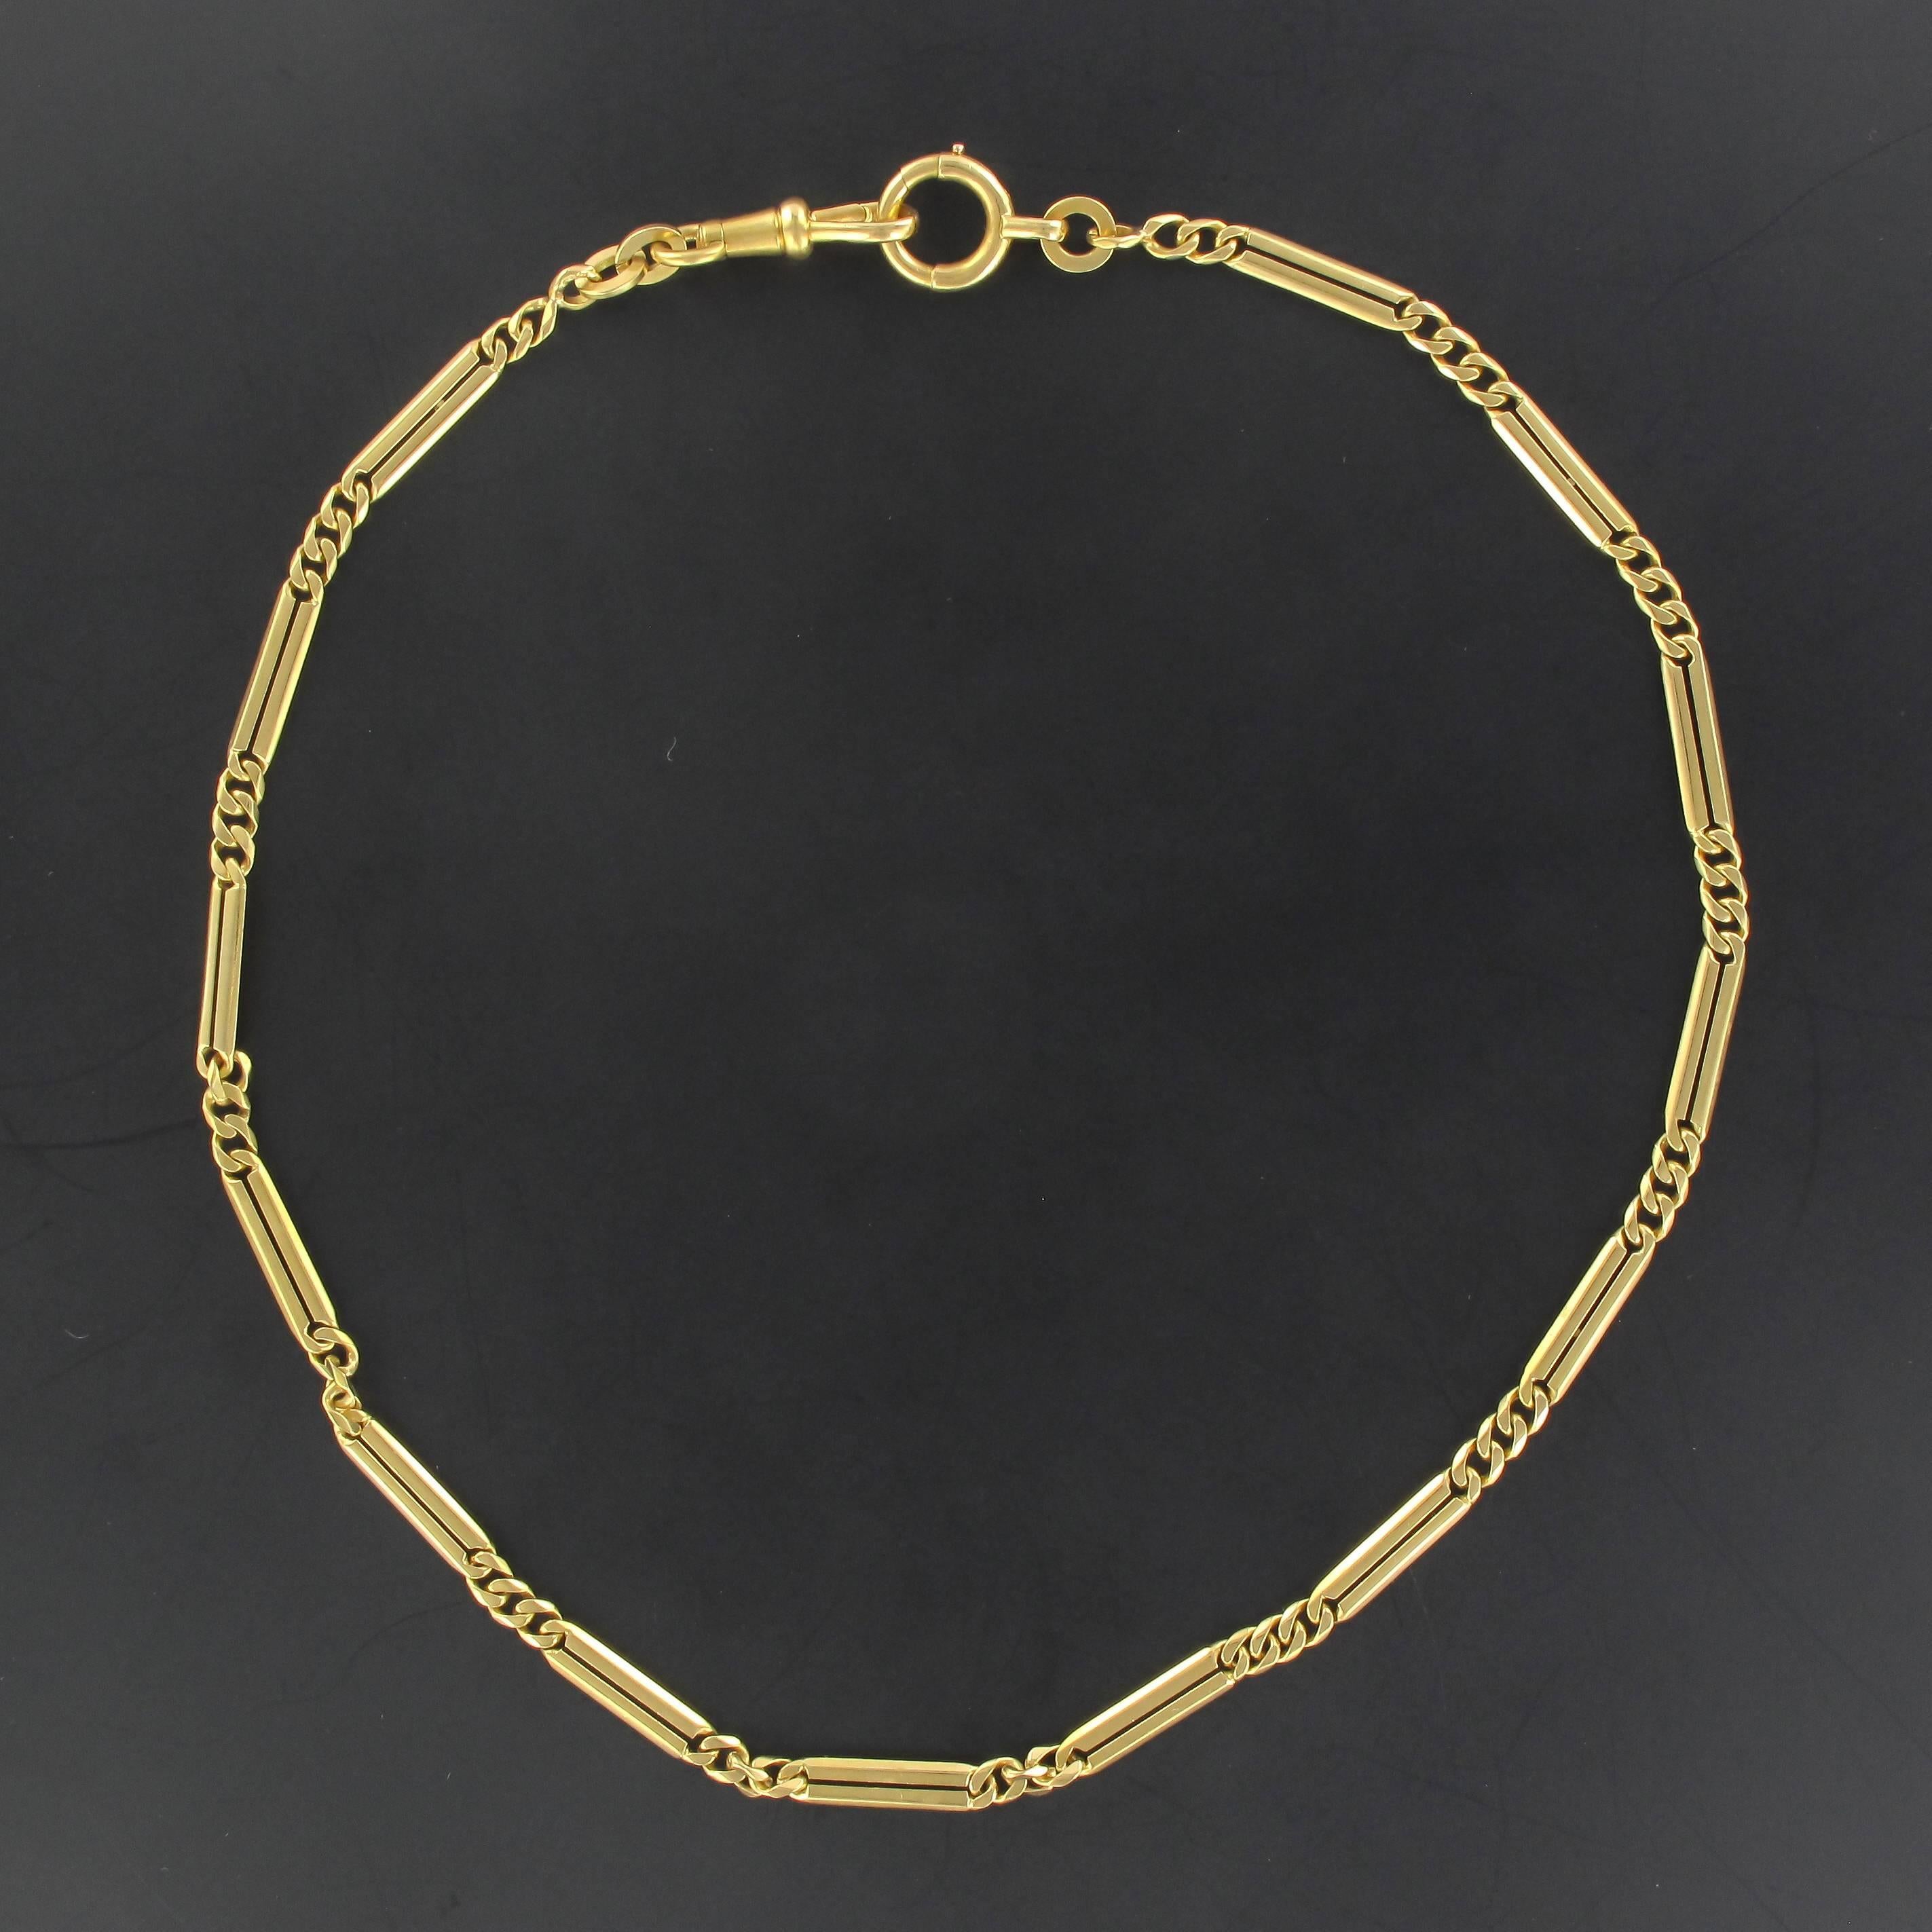 Watch chain in 18 carat yellow gold, horse head hallmark.

This splendid antique watch chain is composed of sections of curb chain alternating with elongated Figaro links. The clasp of this antique gold chain is a large spring ring clasp with a